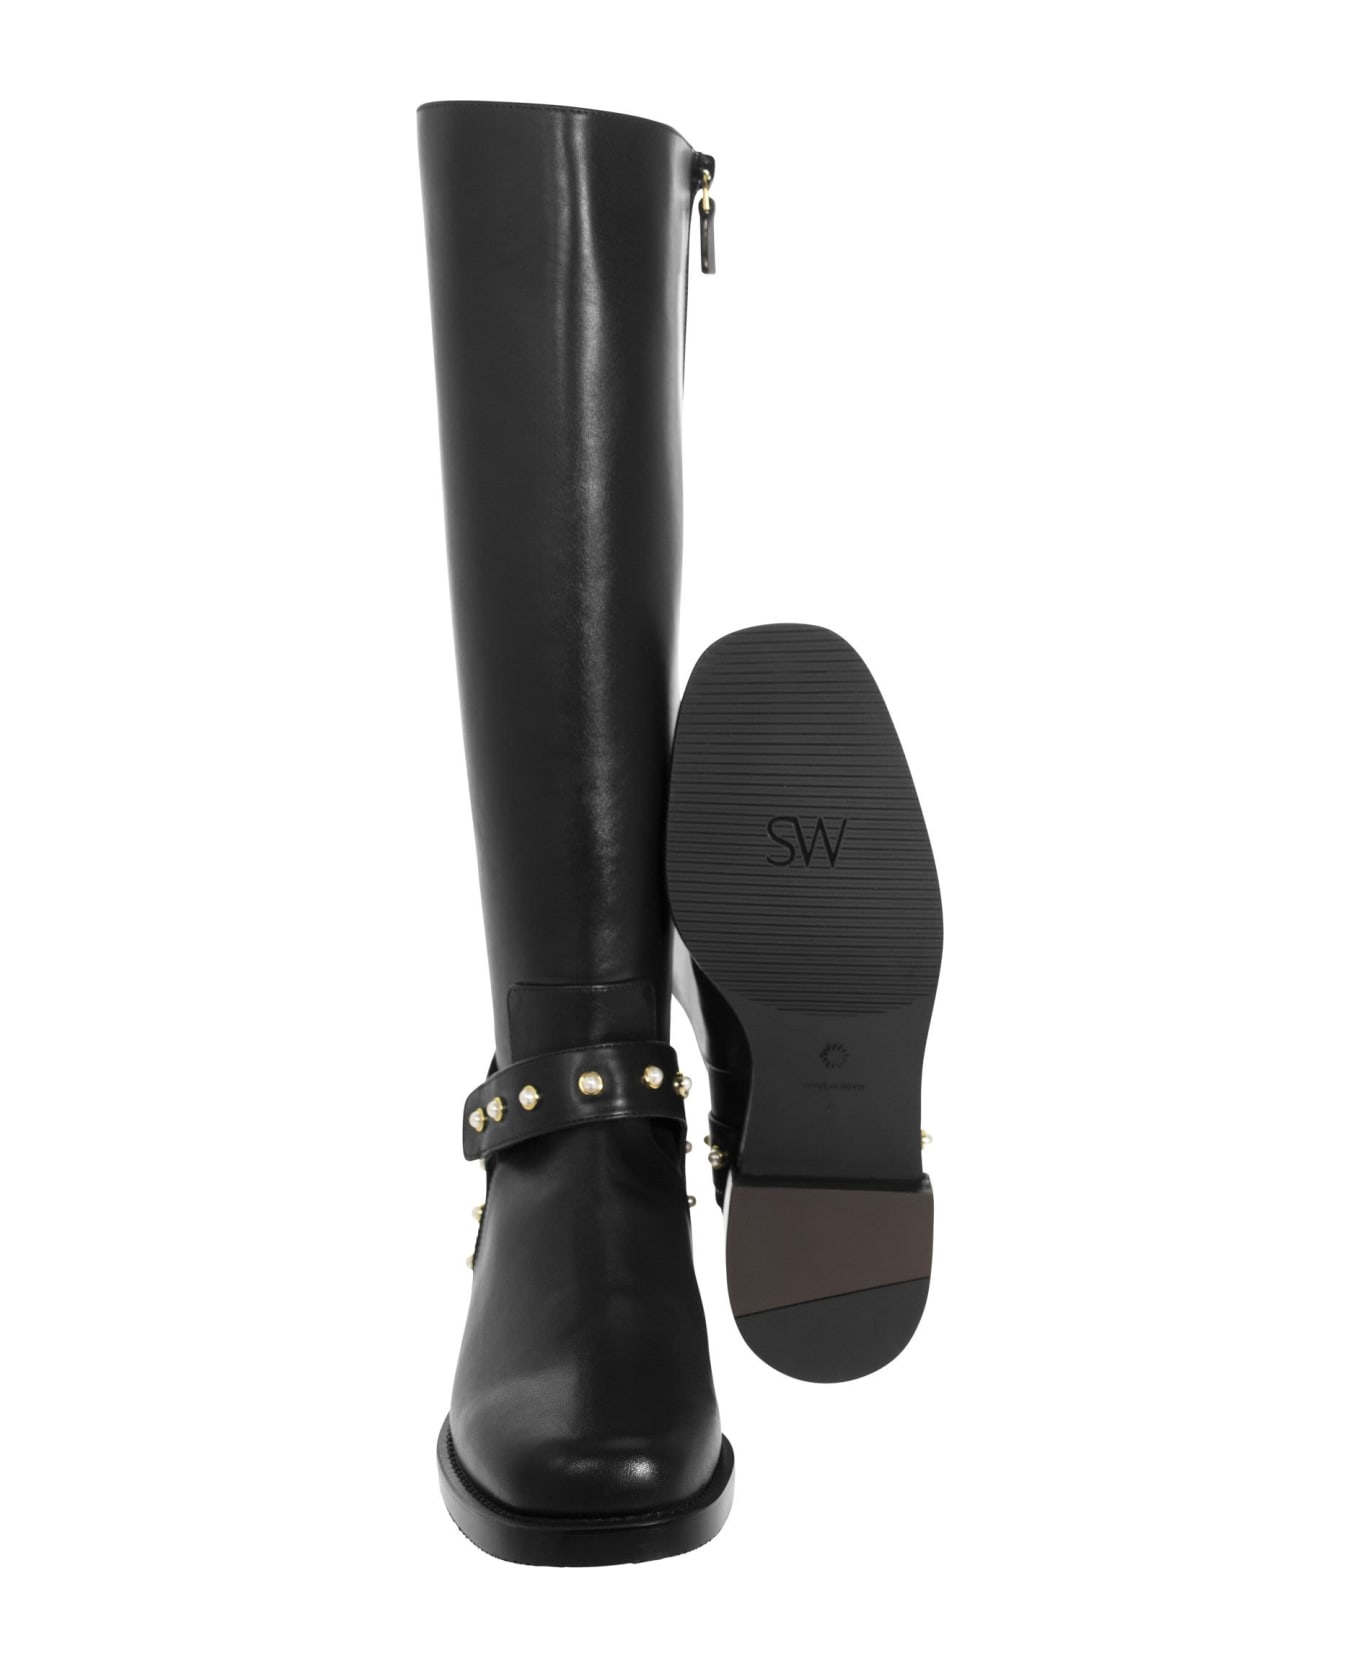 Stuart Weitzman Pearl Moto - Leather Boot With Pearls - Black